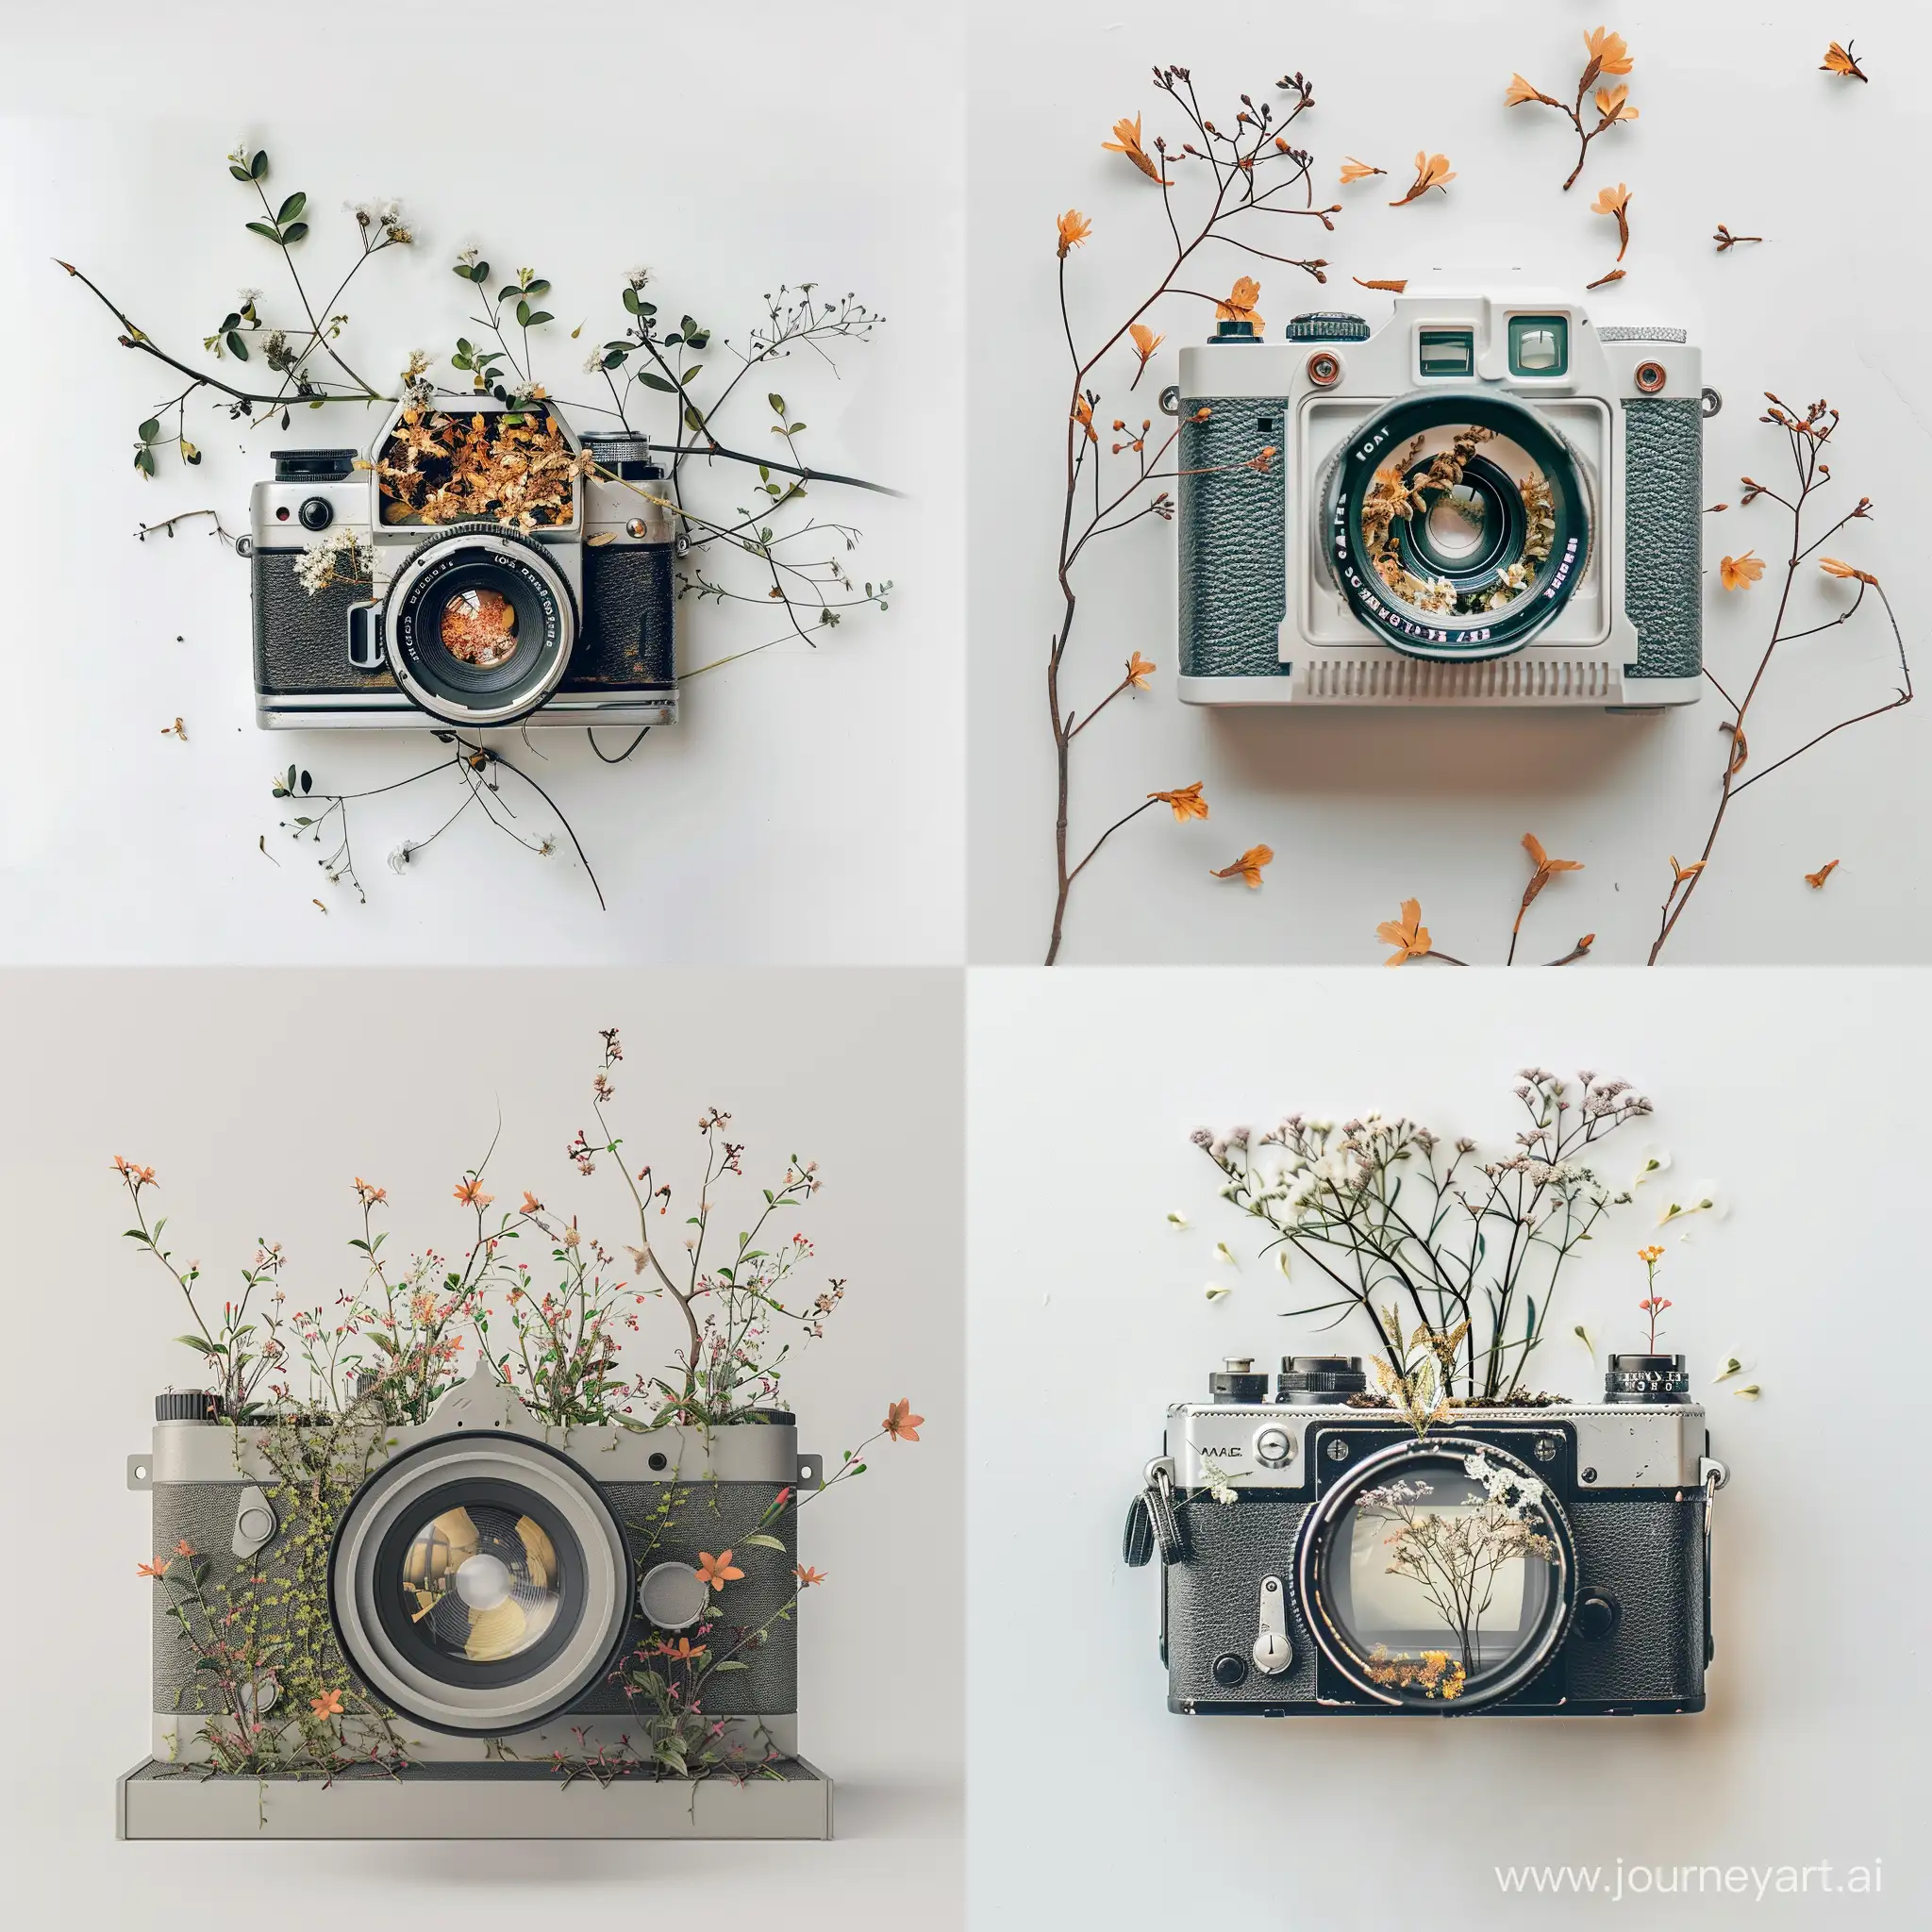 A modern photography camera on a white background with delicate and beautiful plants growing inside it